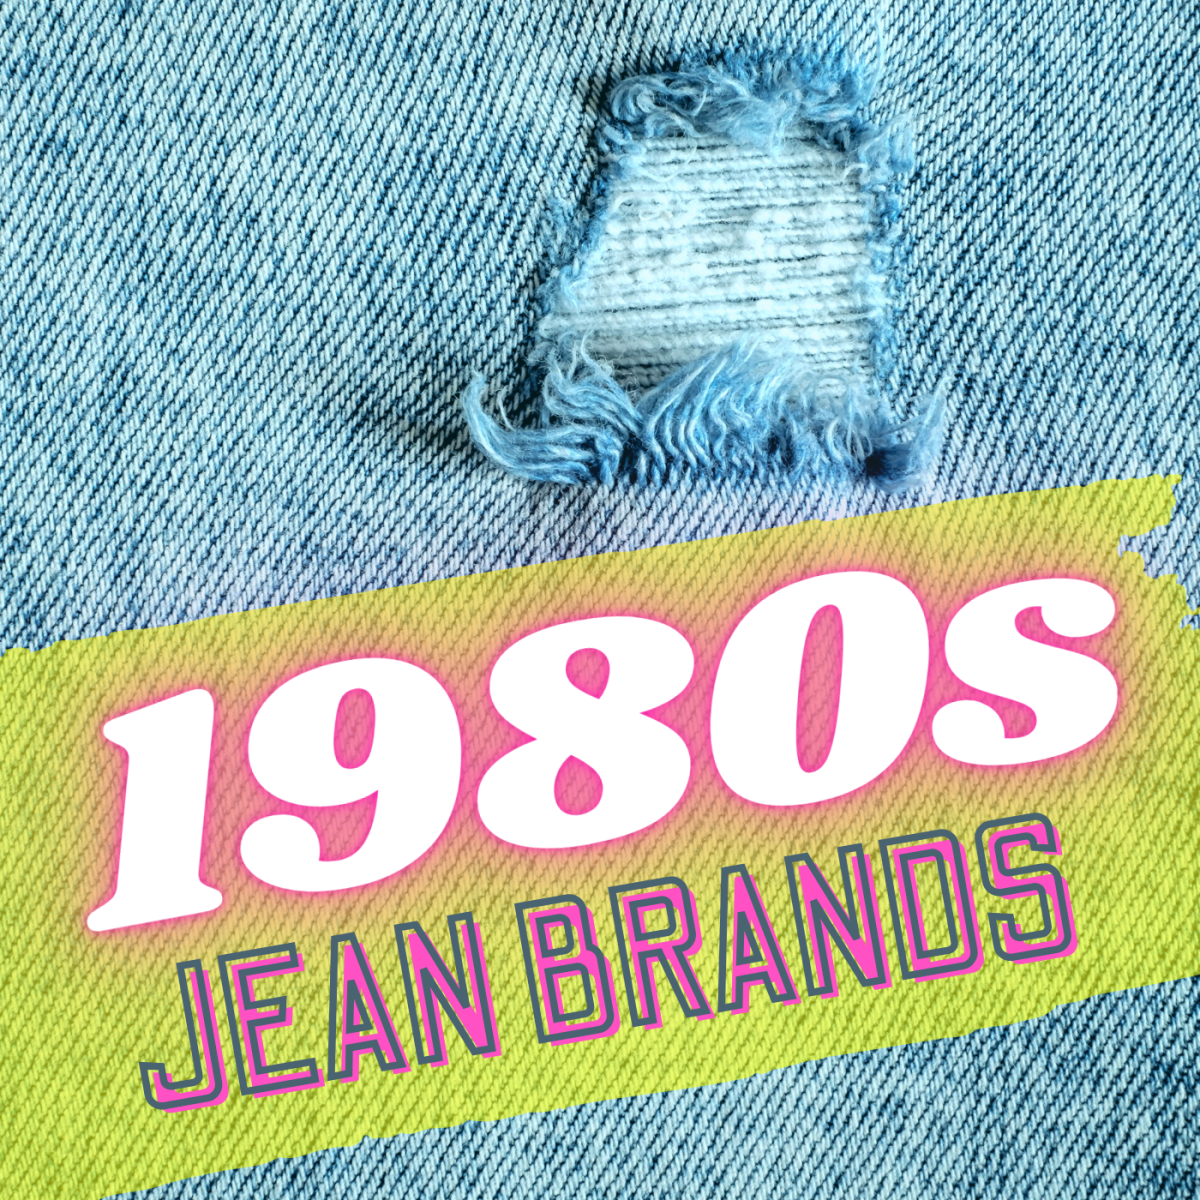 Relive the hottest blue jean brands of the 1980s, plus denim fashion trends of the decade!